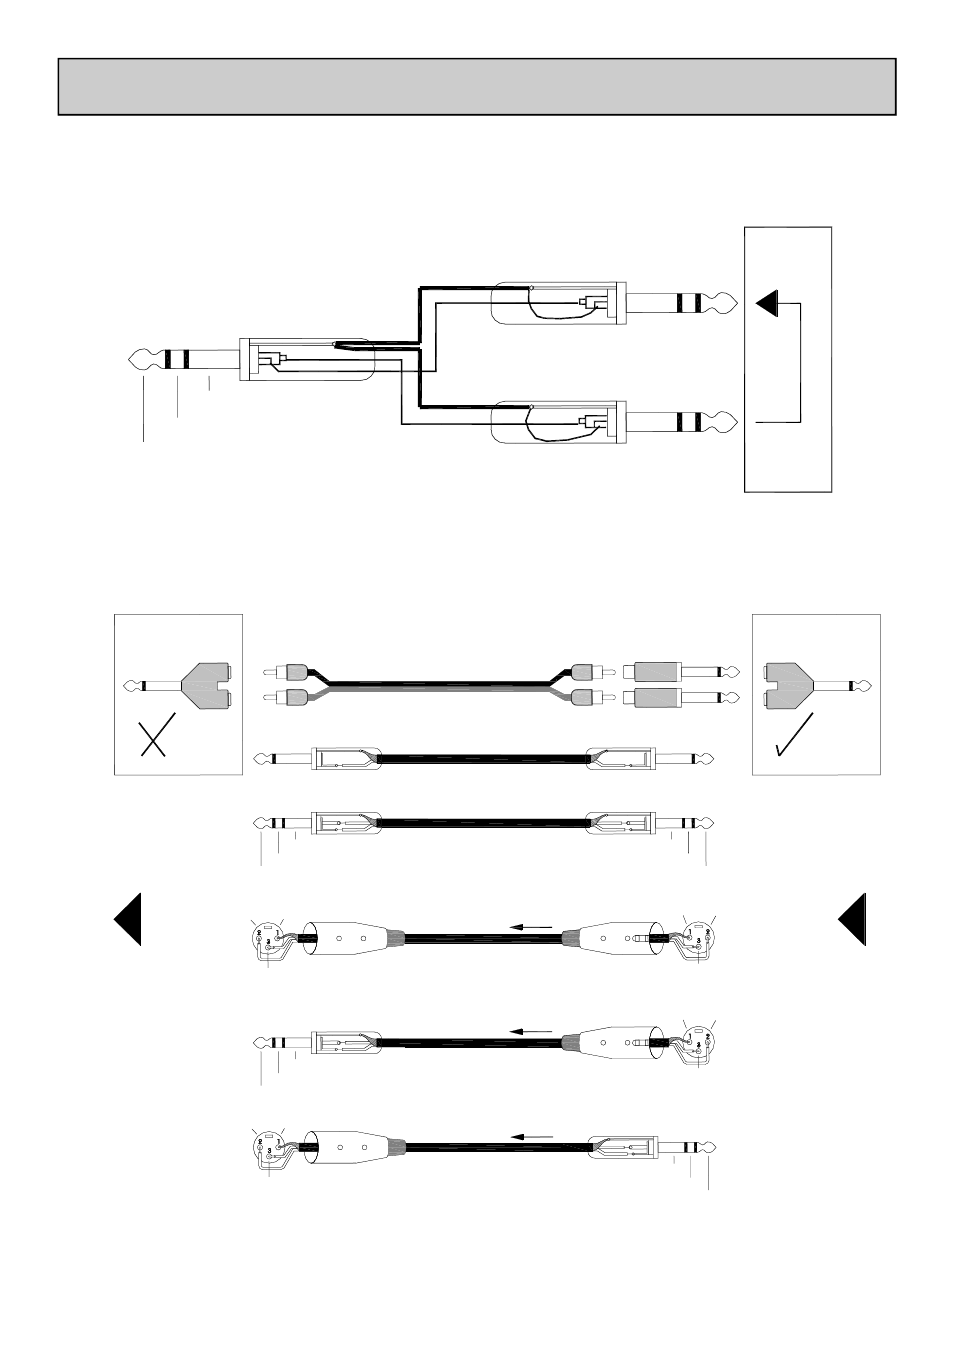 Insert cable wiring, General wiring information, Y-adapter no | Y-adapter yes | Allen&Heath XB-14-2 User Manual | Page 34 / 37